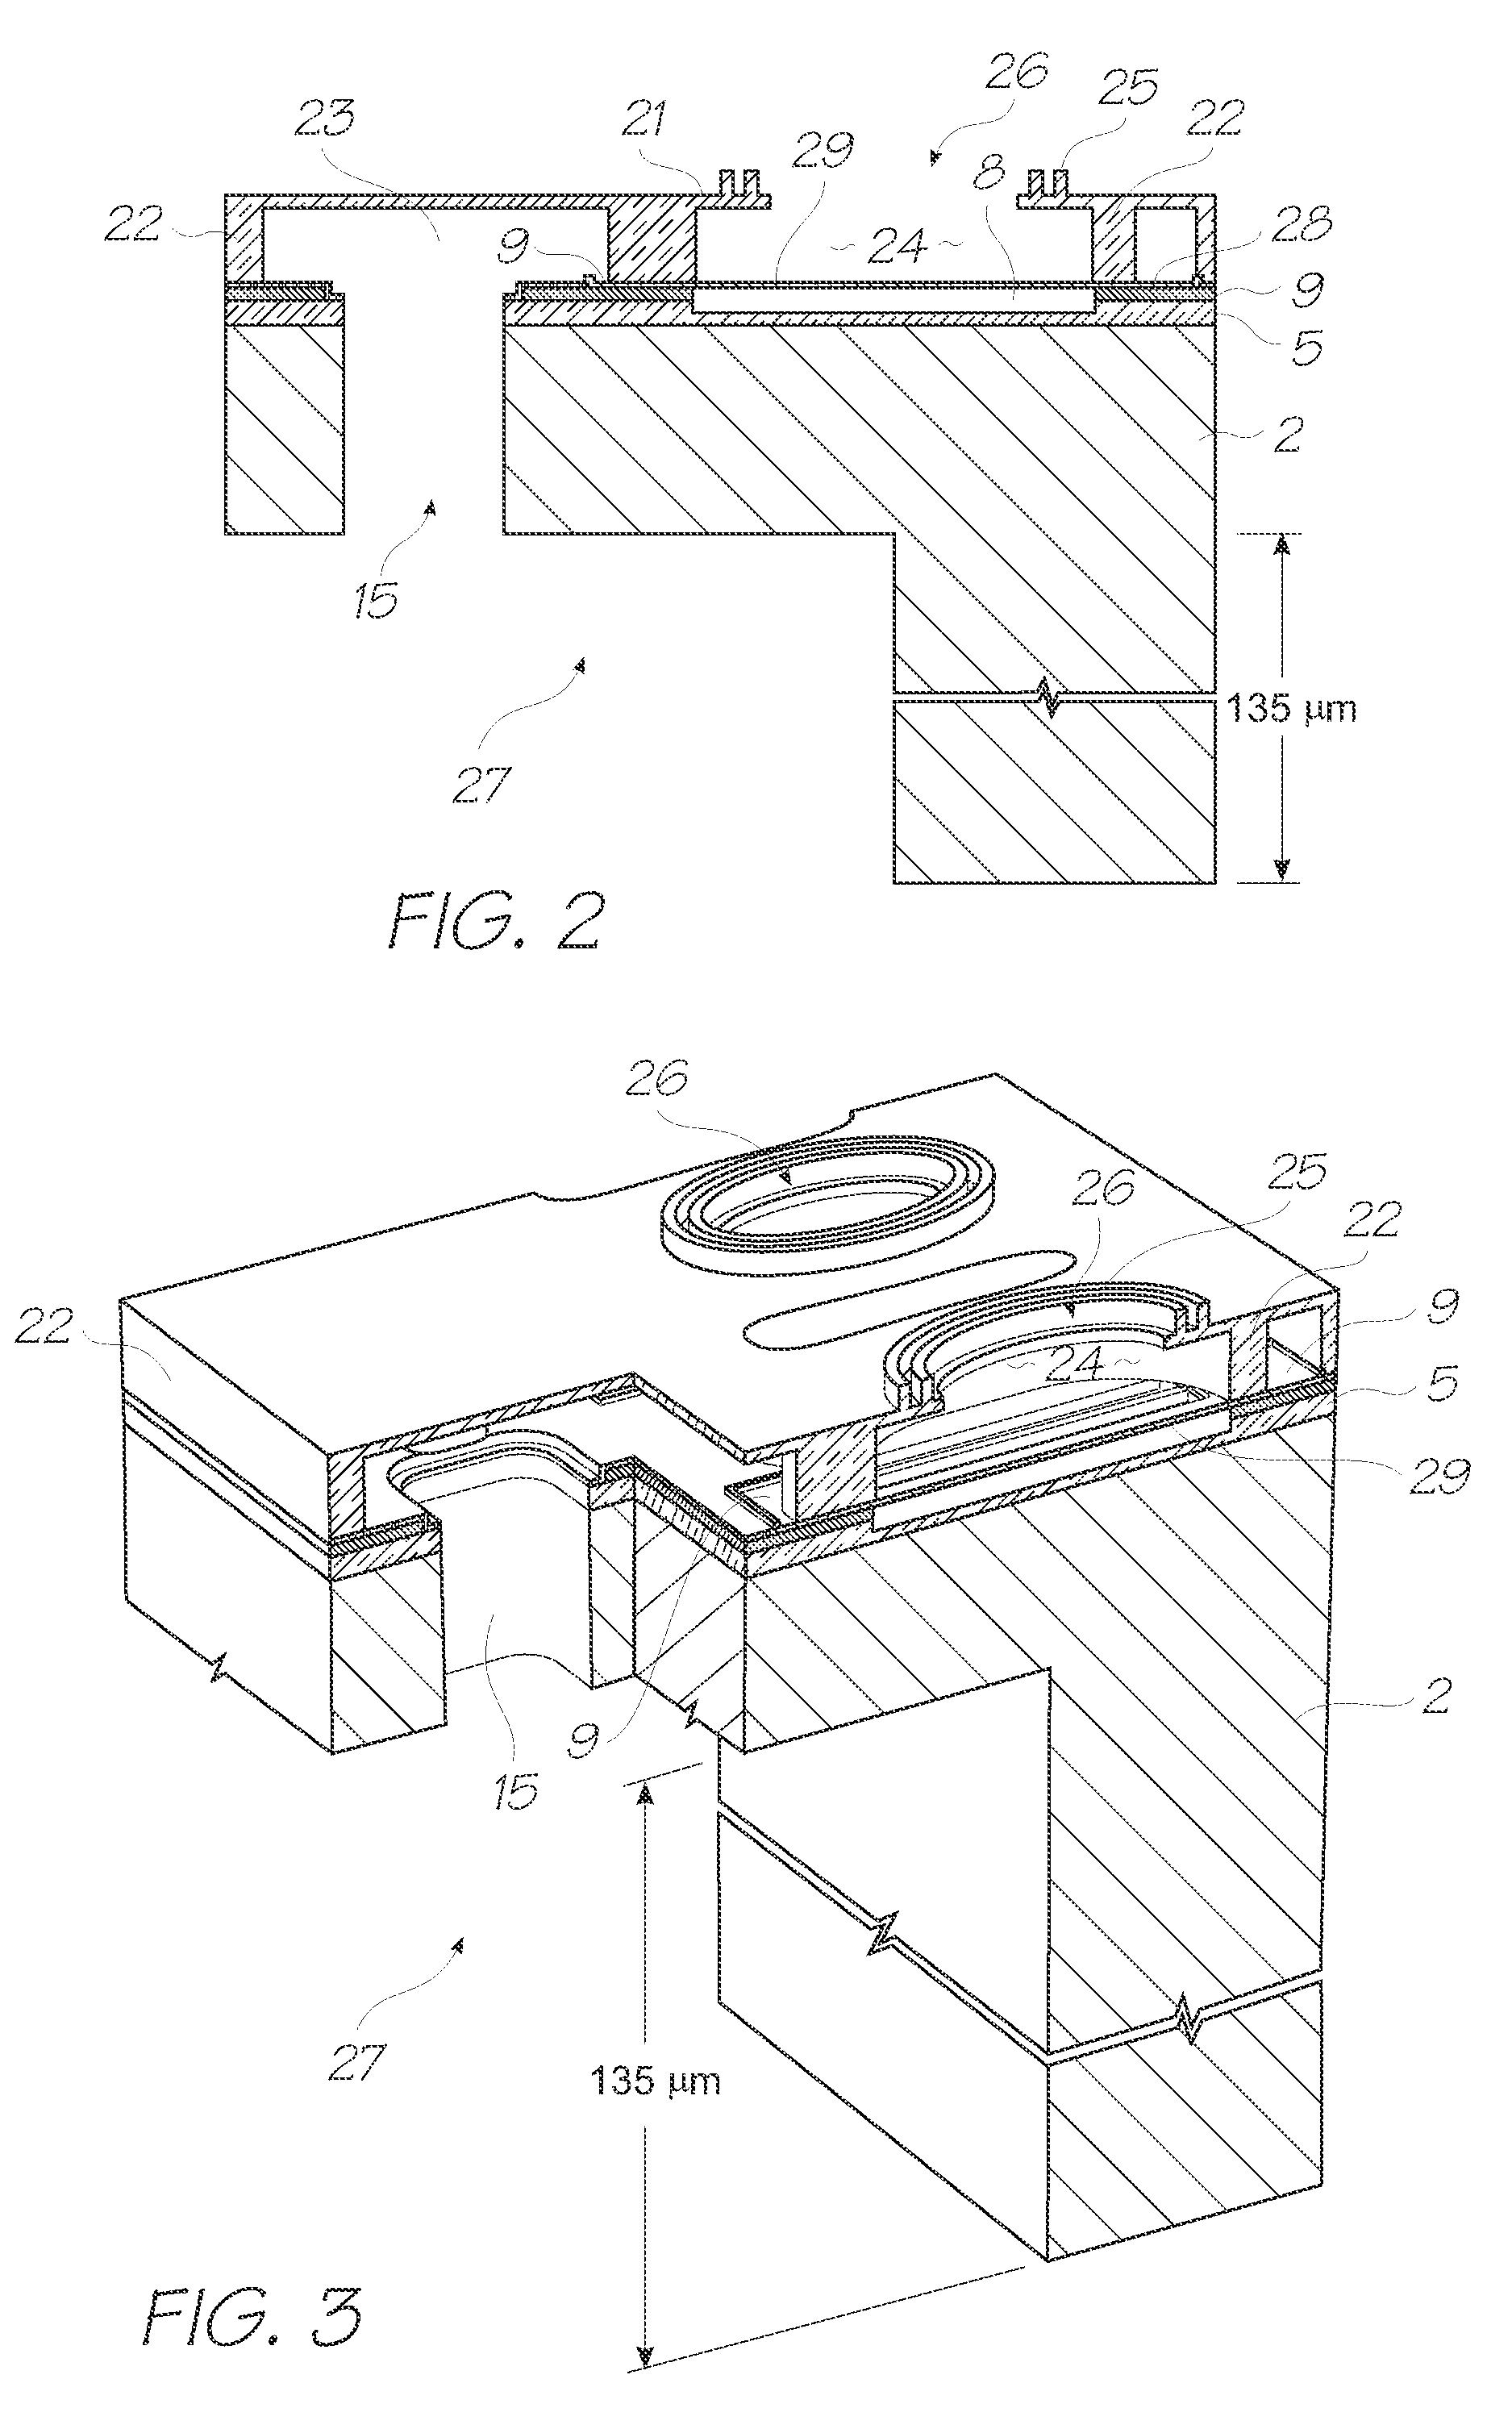 Printhead having polymer incorporating nanoparticles coated on ink ejection face